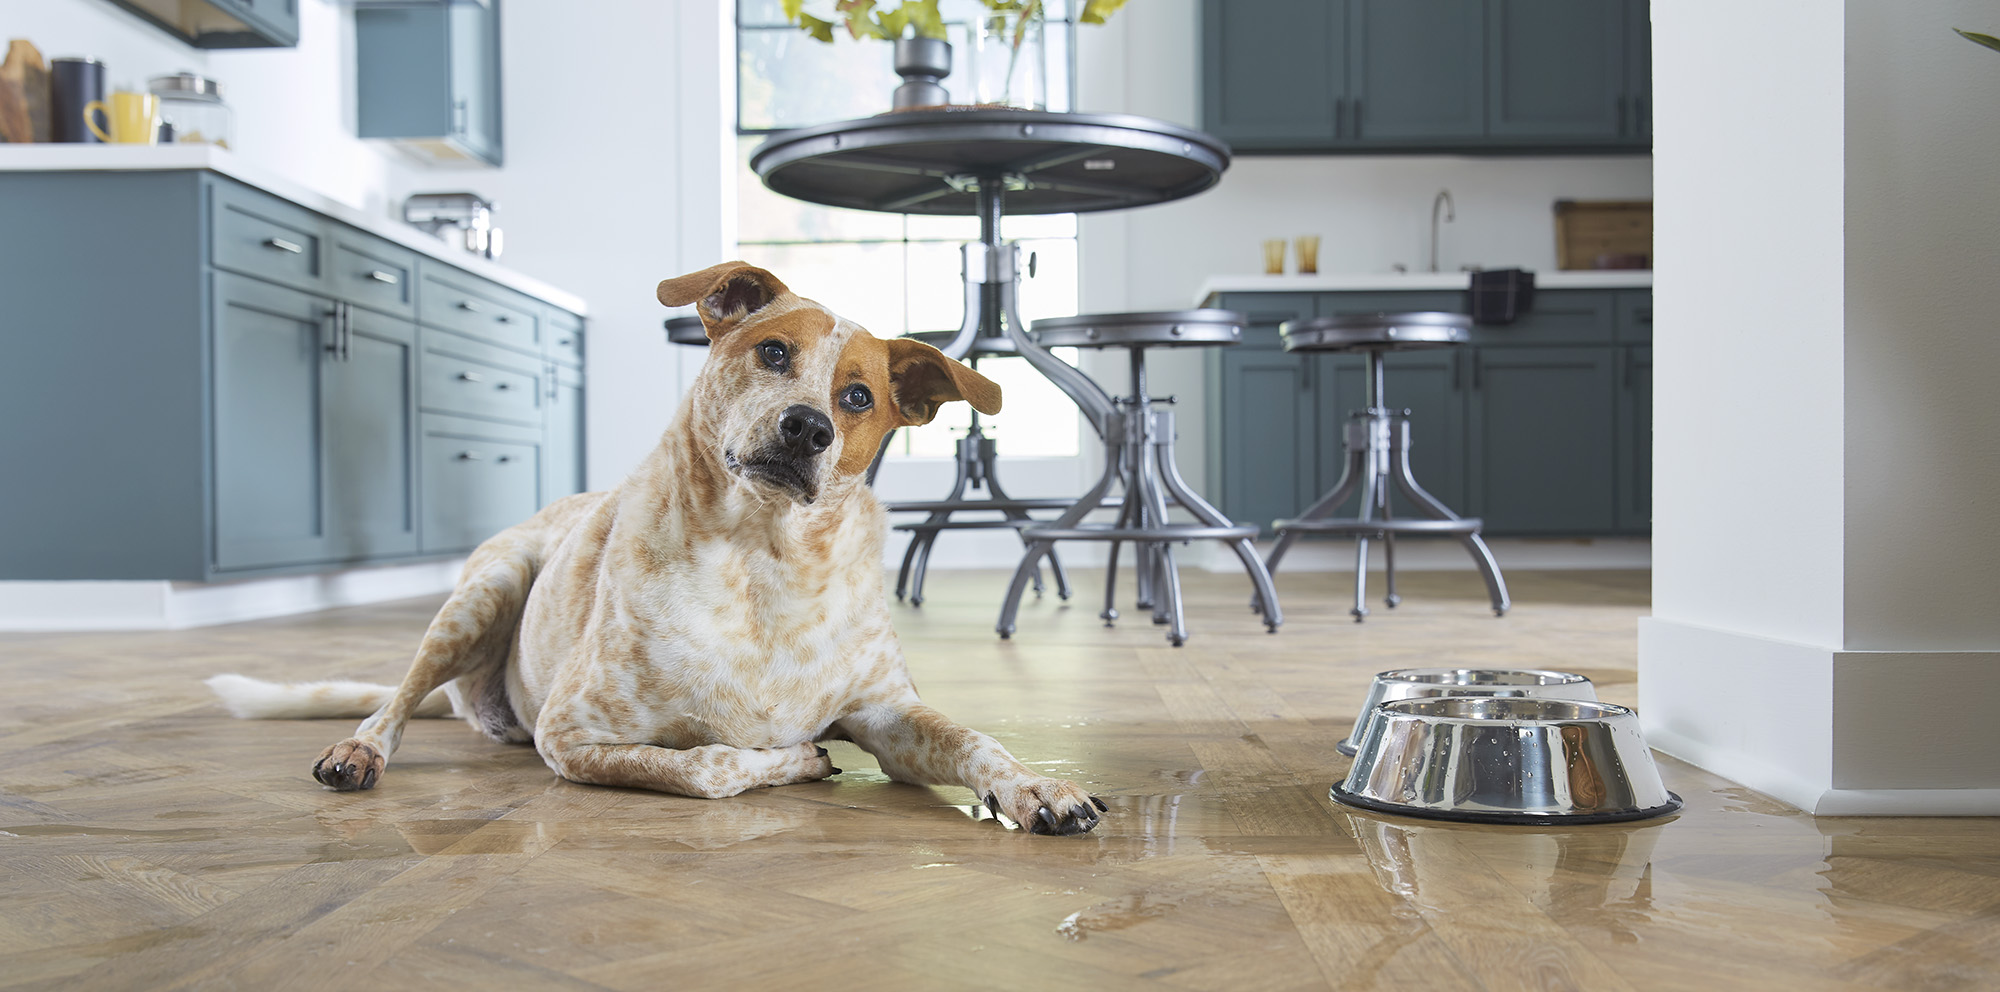 Enter The Money Pit's Flood Proof Pet Sweepstakes and win a $1,000 gift card for LL Flooring and more!